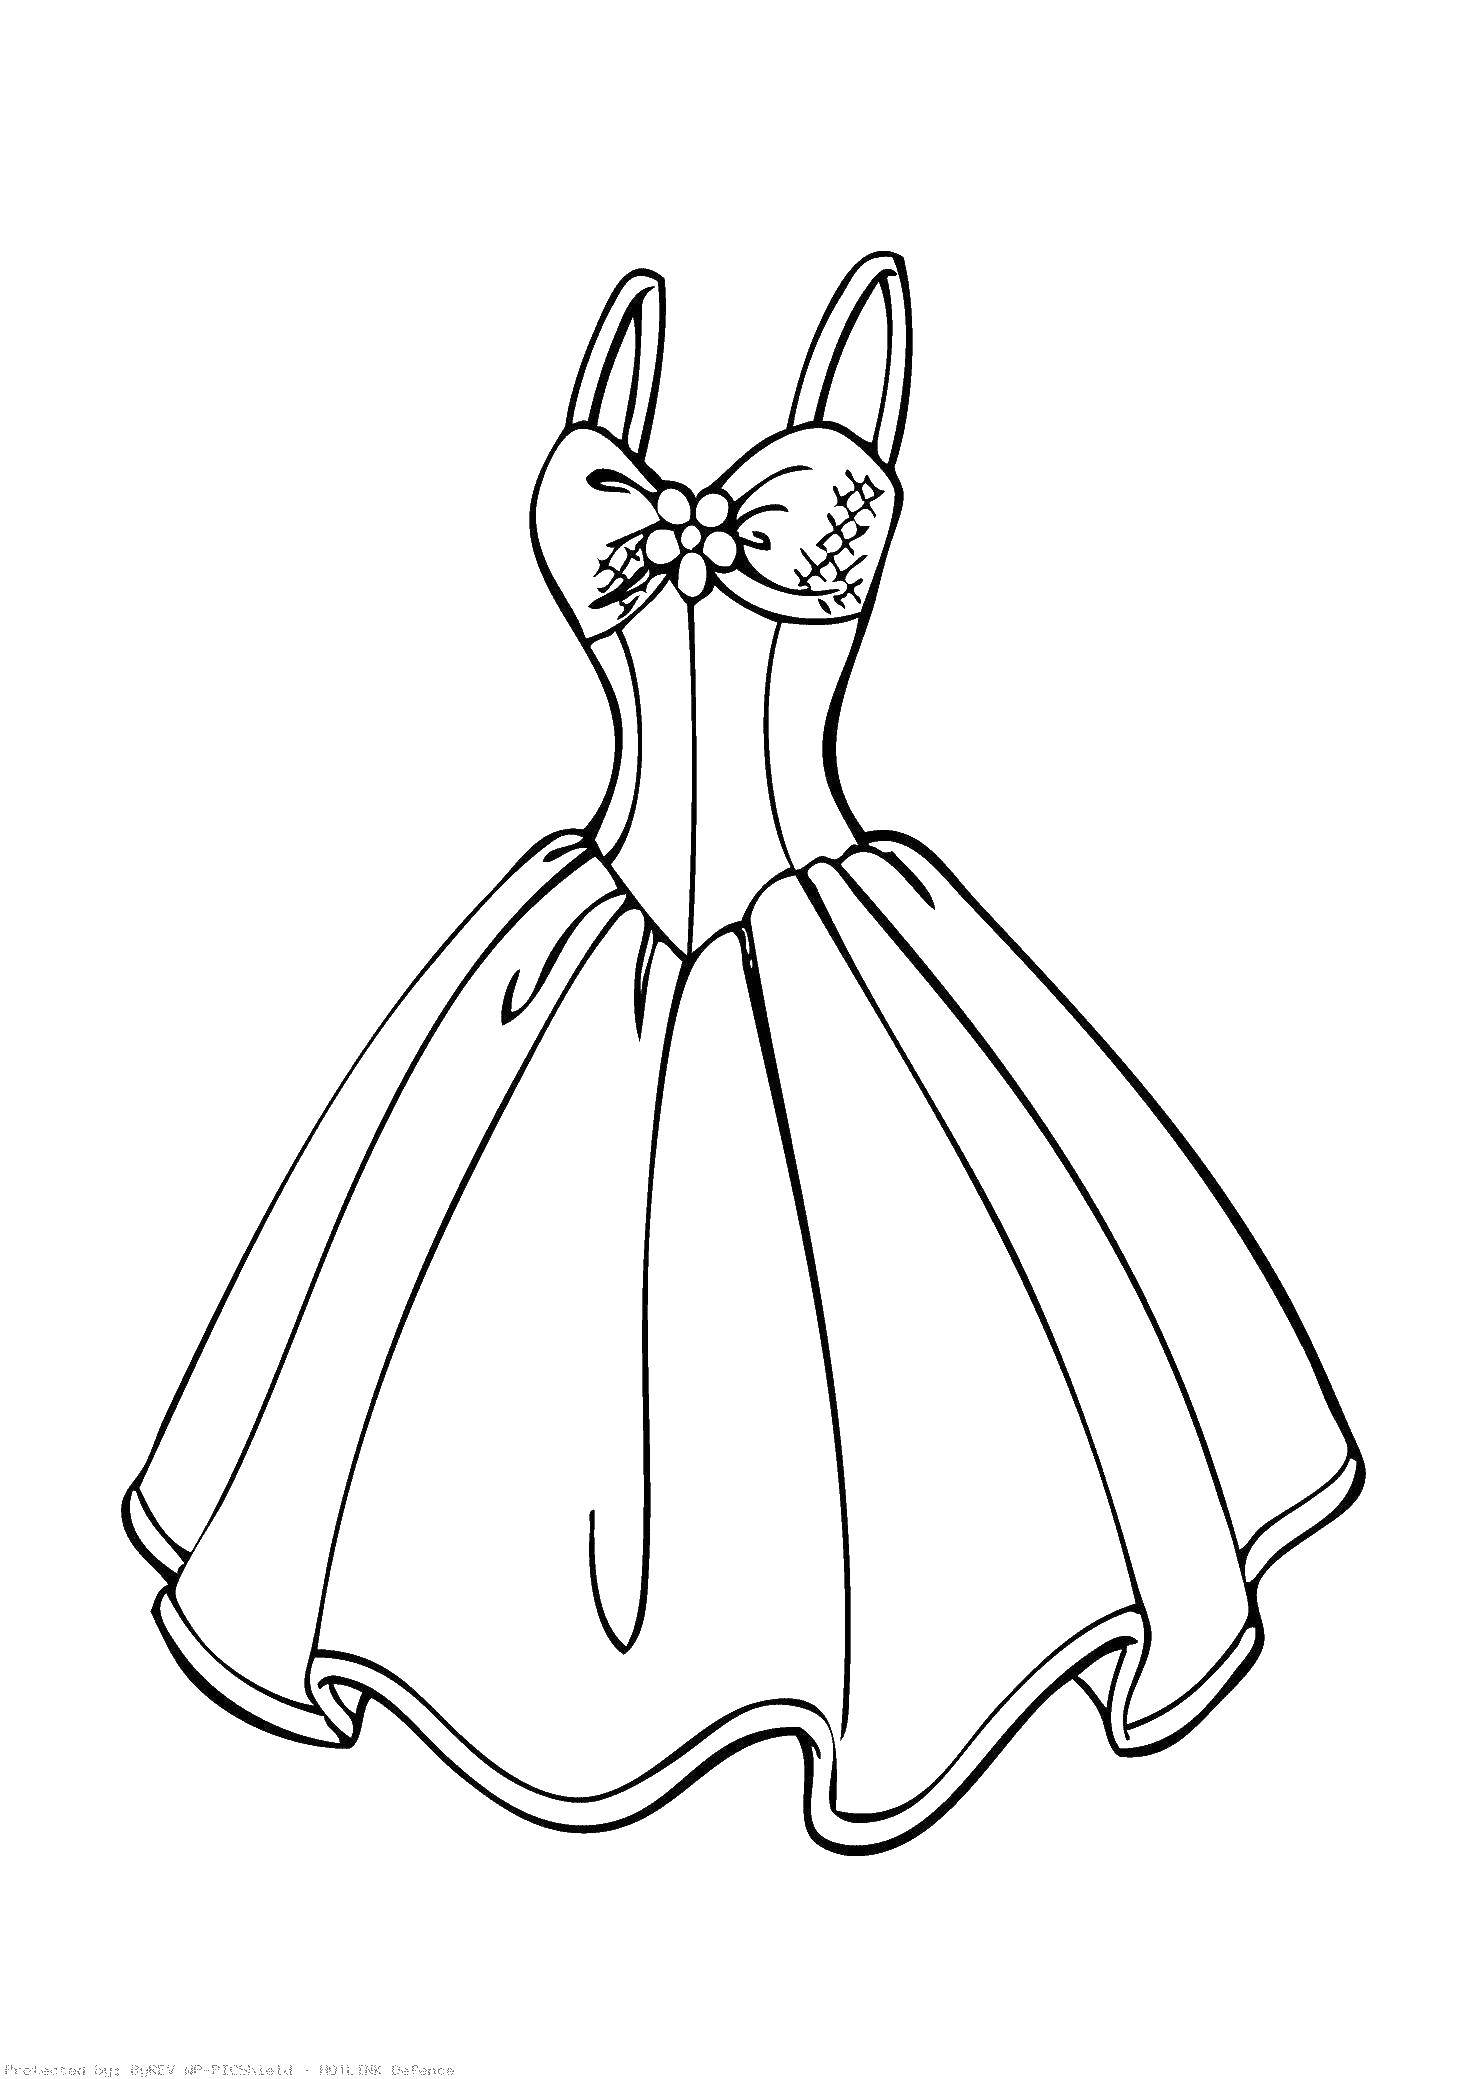 Coloring Dress with flower. Category Dress. Tags:  Clothing, dress.